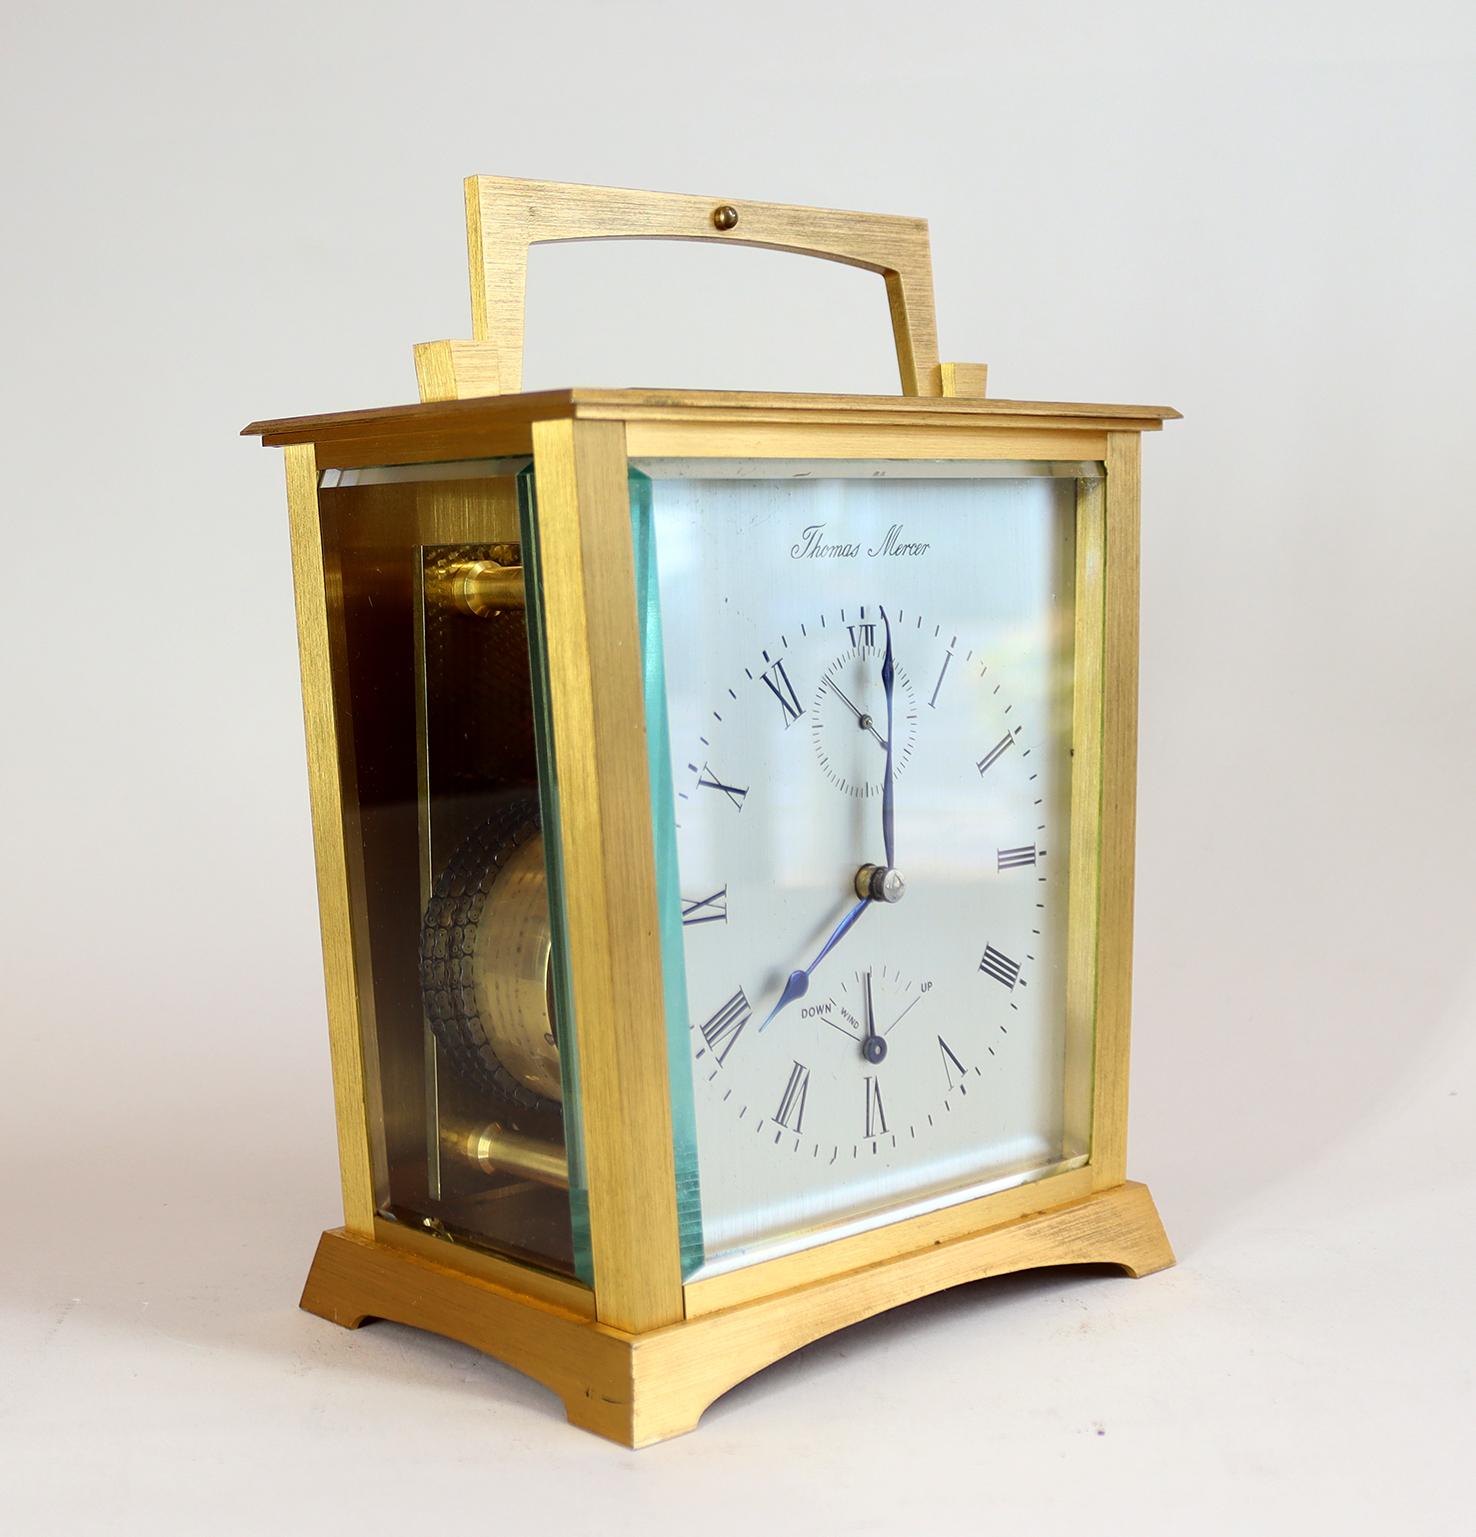 Thomas Mercer Chronometer Carriage Timepiece In Good Condition For Sale In Amersham, GB